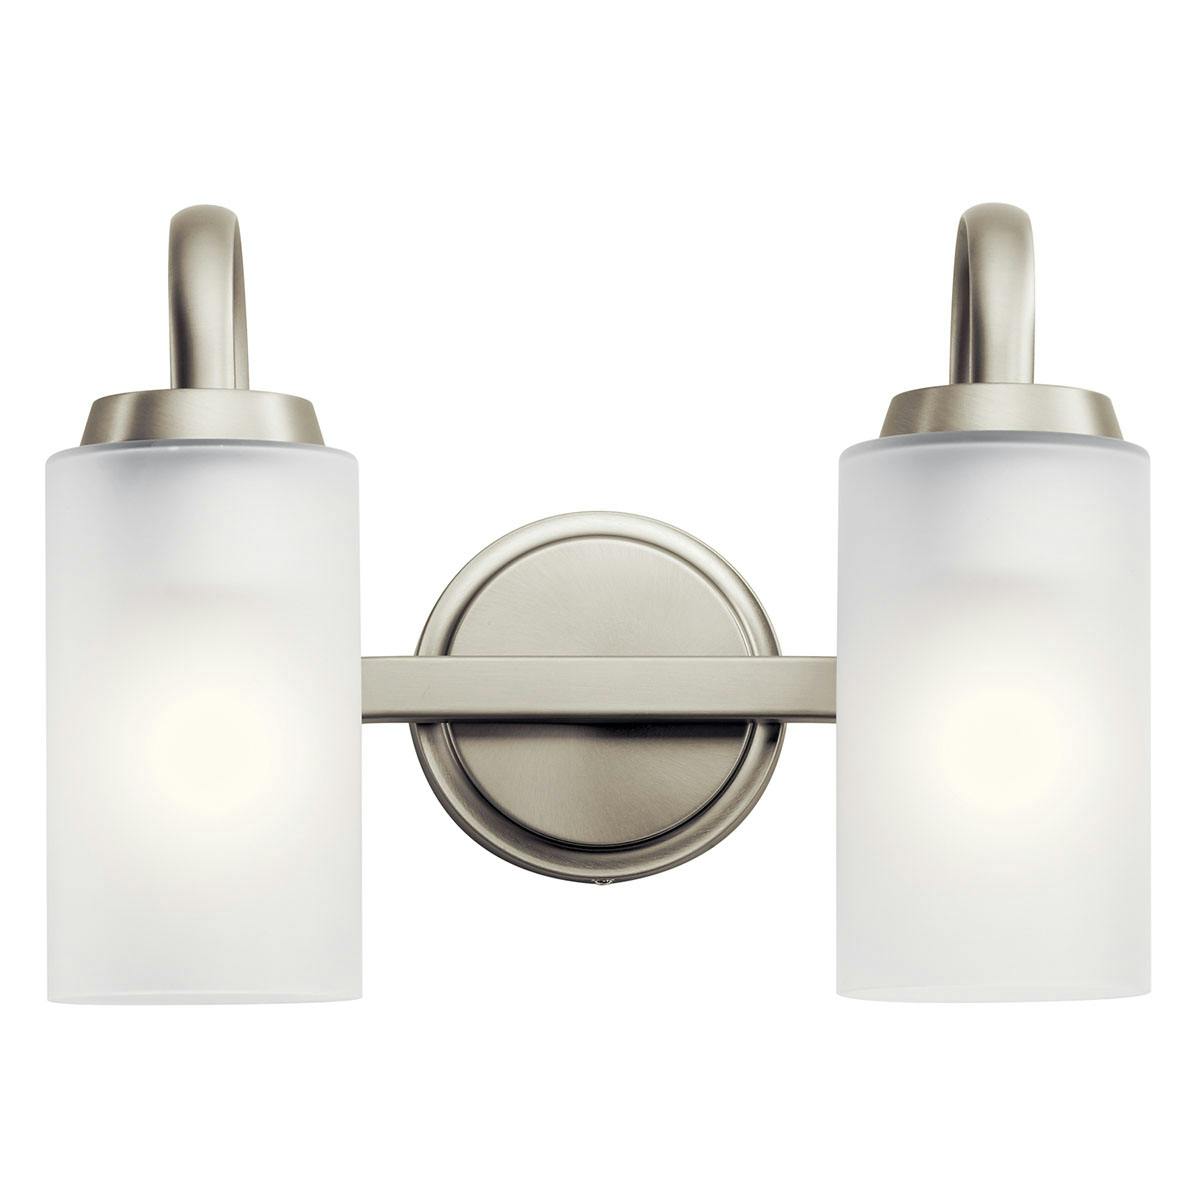 Front view of the Kennewick 2 Light Vanity Light Nickel on a white background